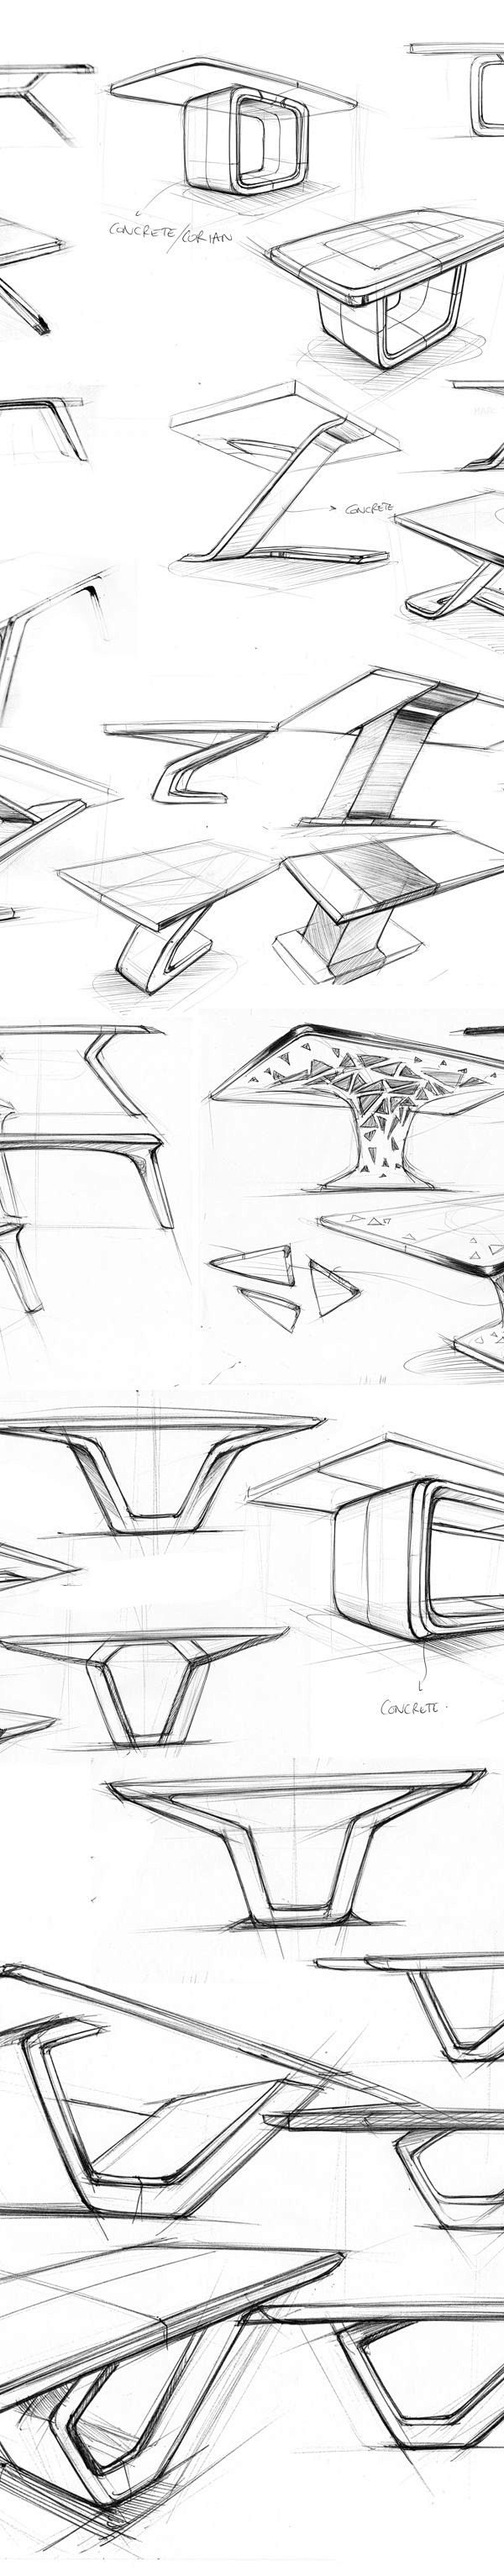 MARBLE TABLE SKETCHE...